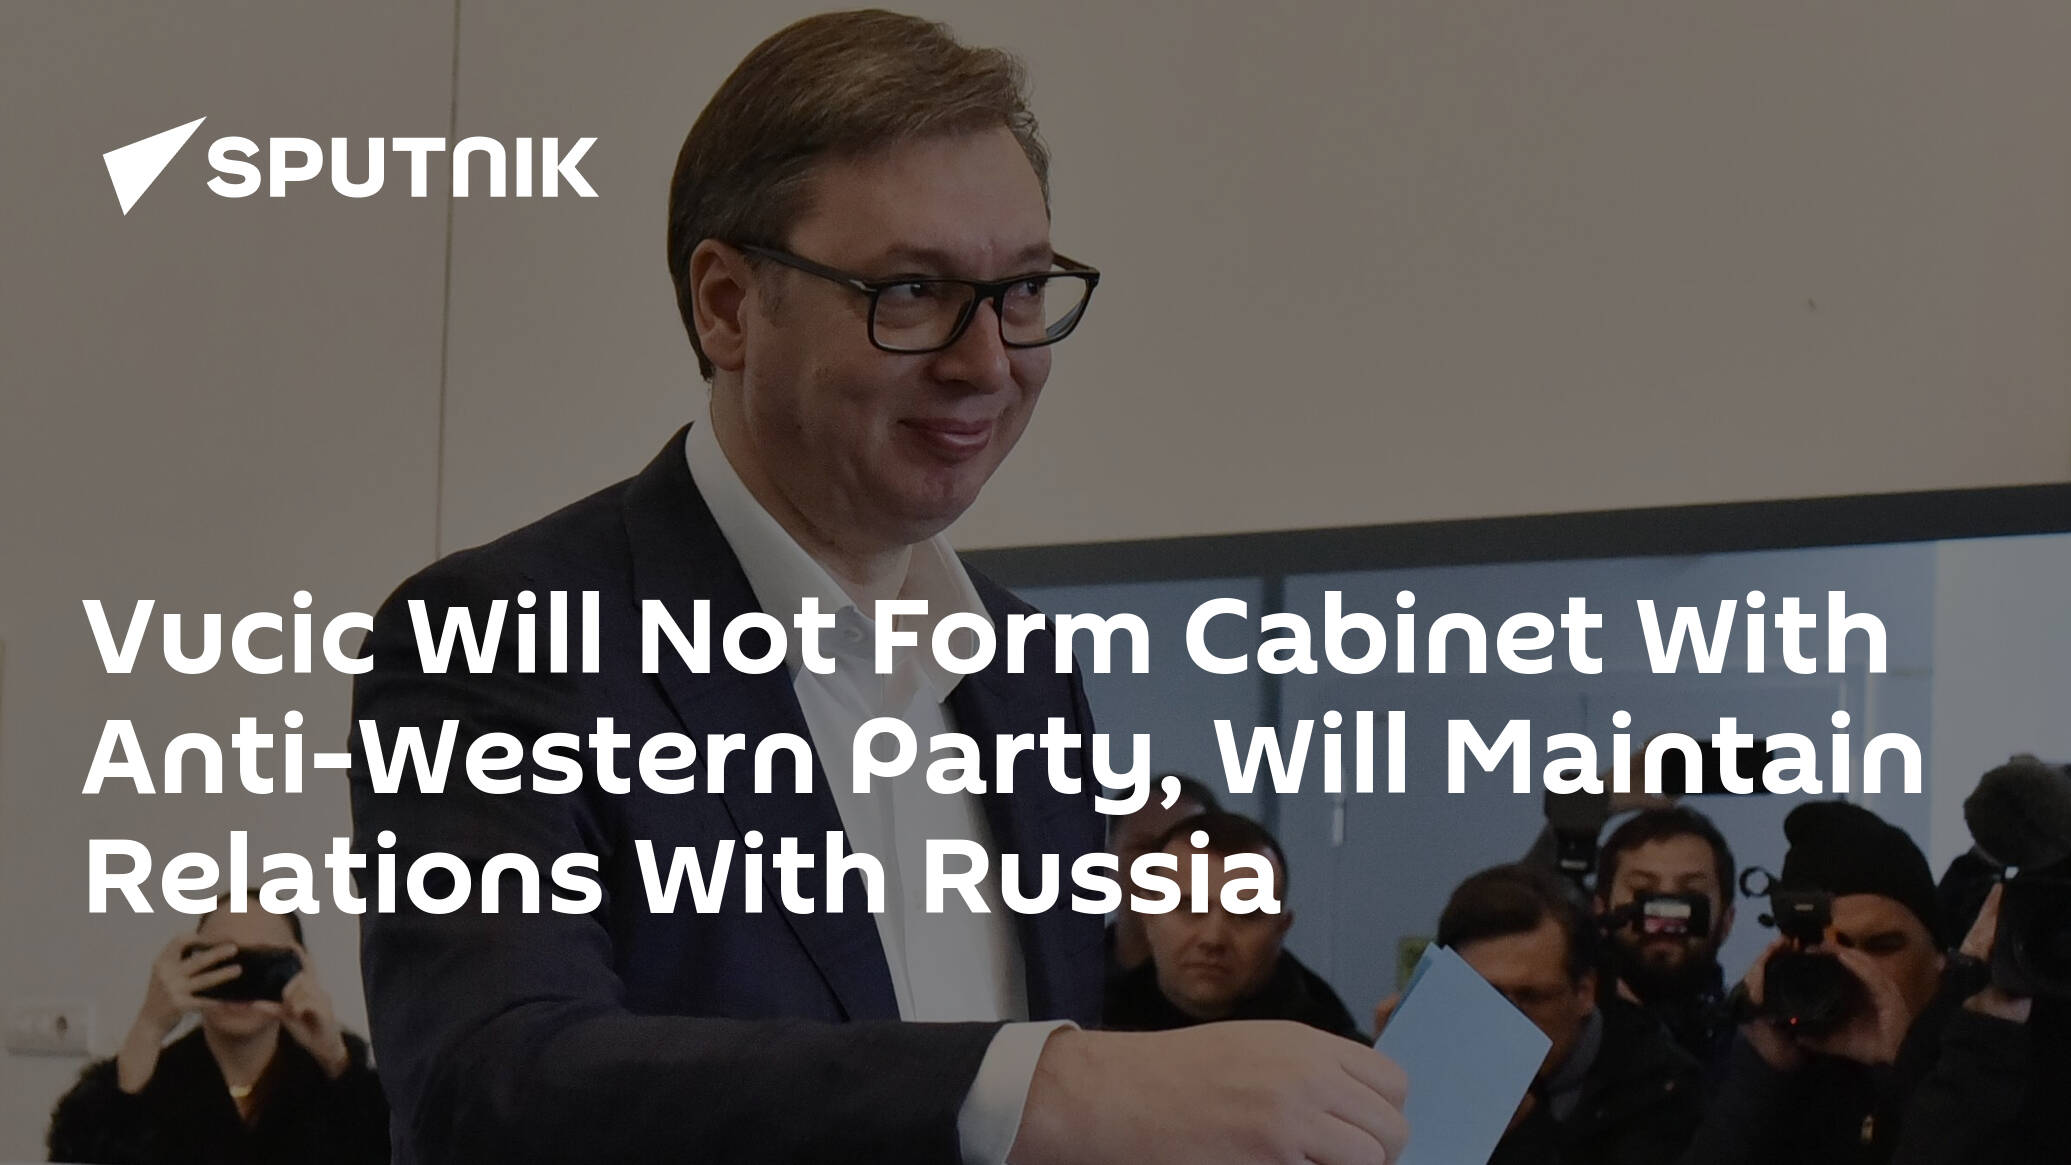 Vucic Will Not Form Cabinet With Anti-Western Party, Will Maintain Relations With Russia